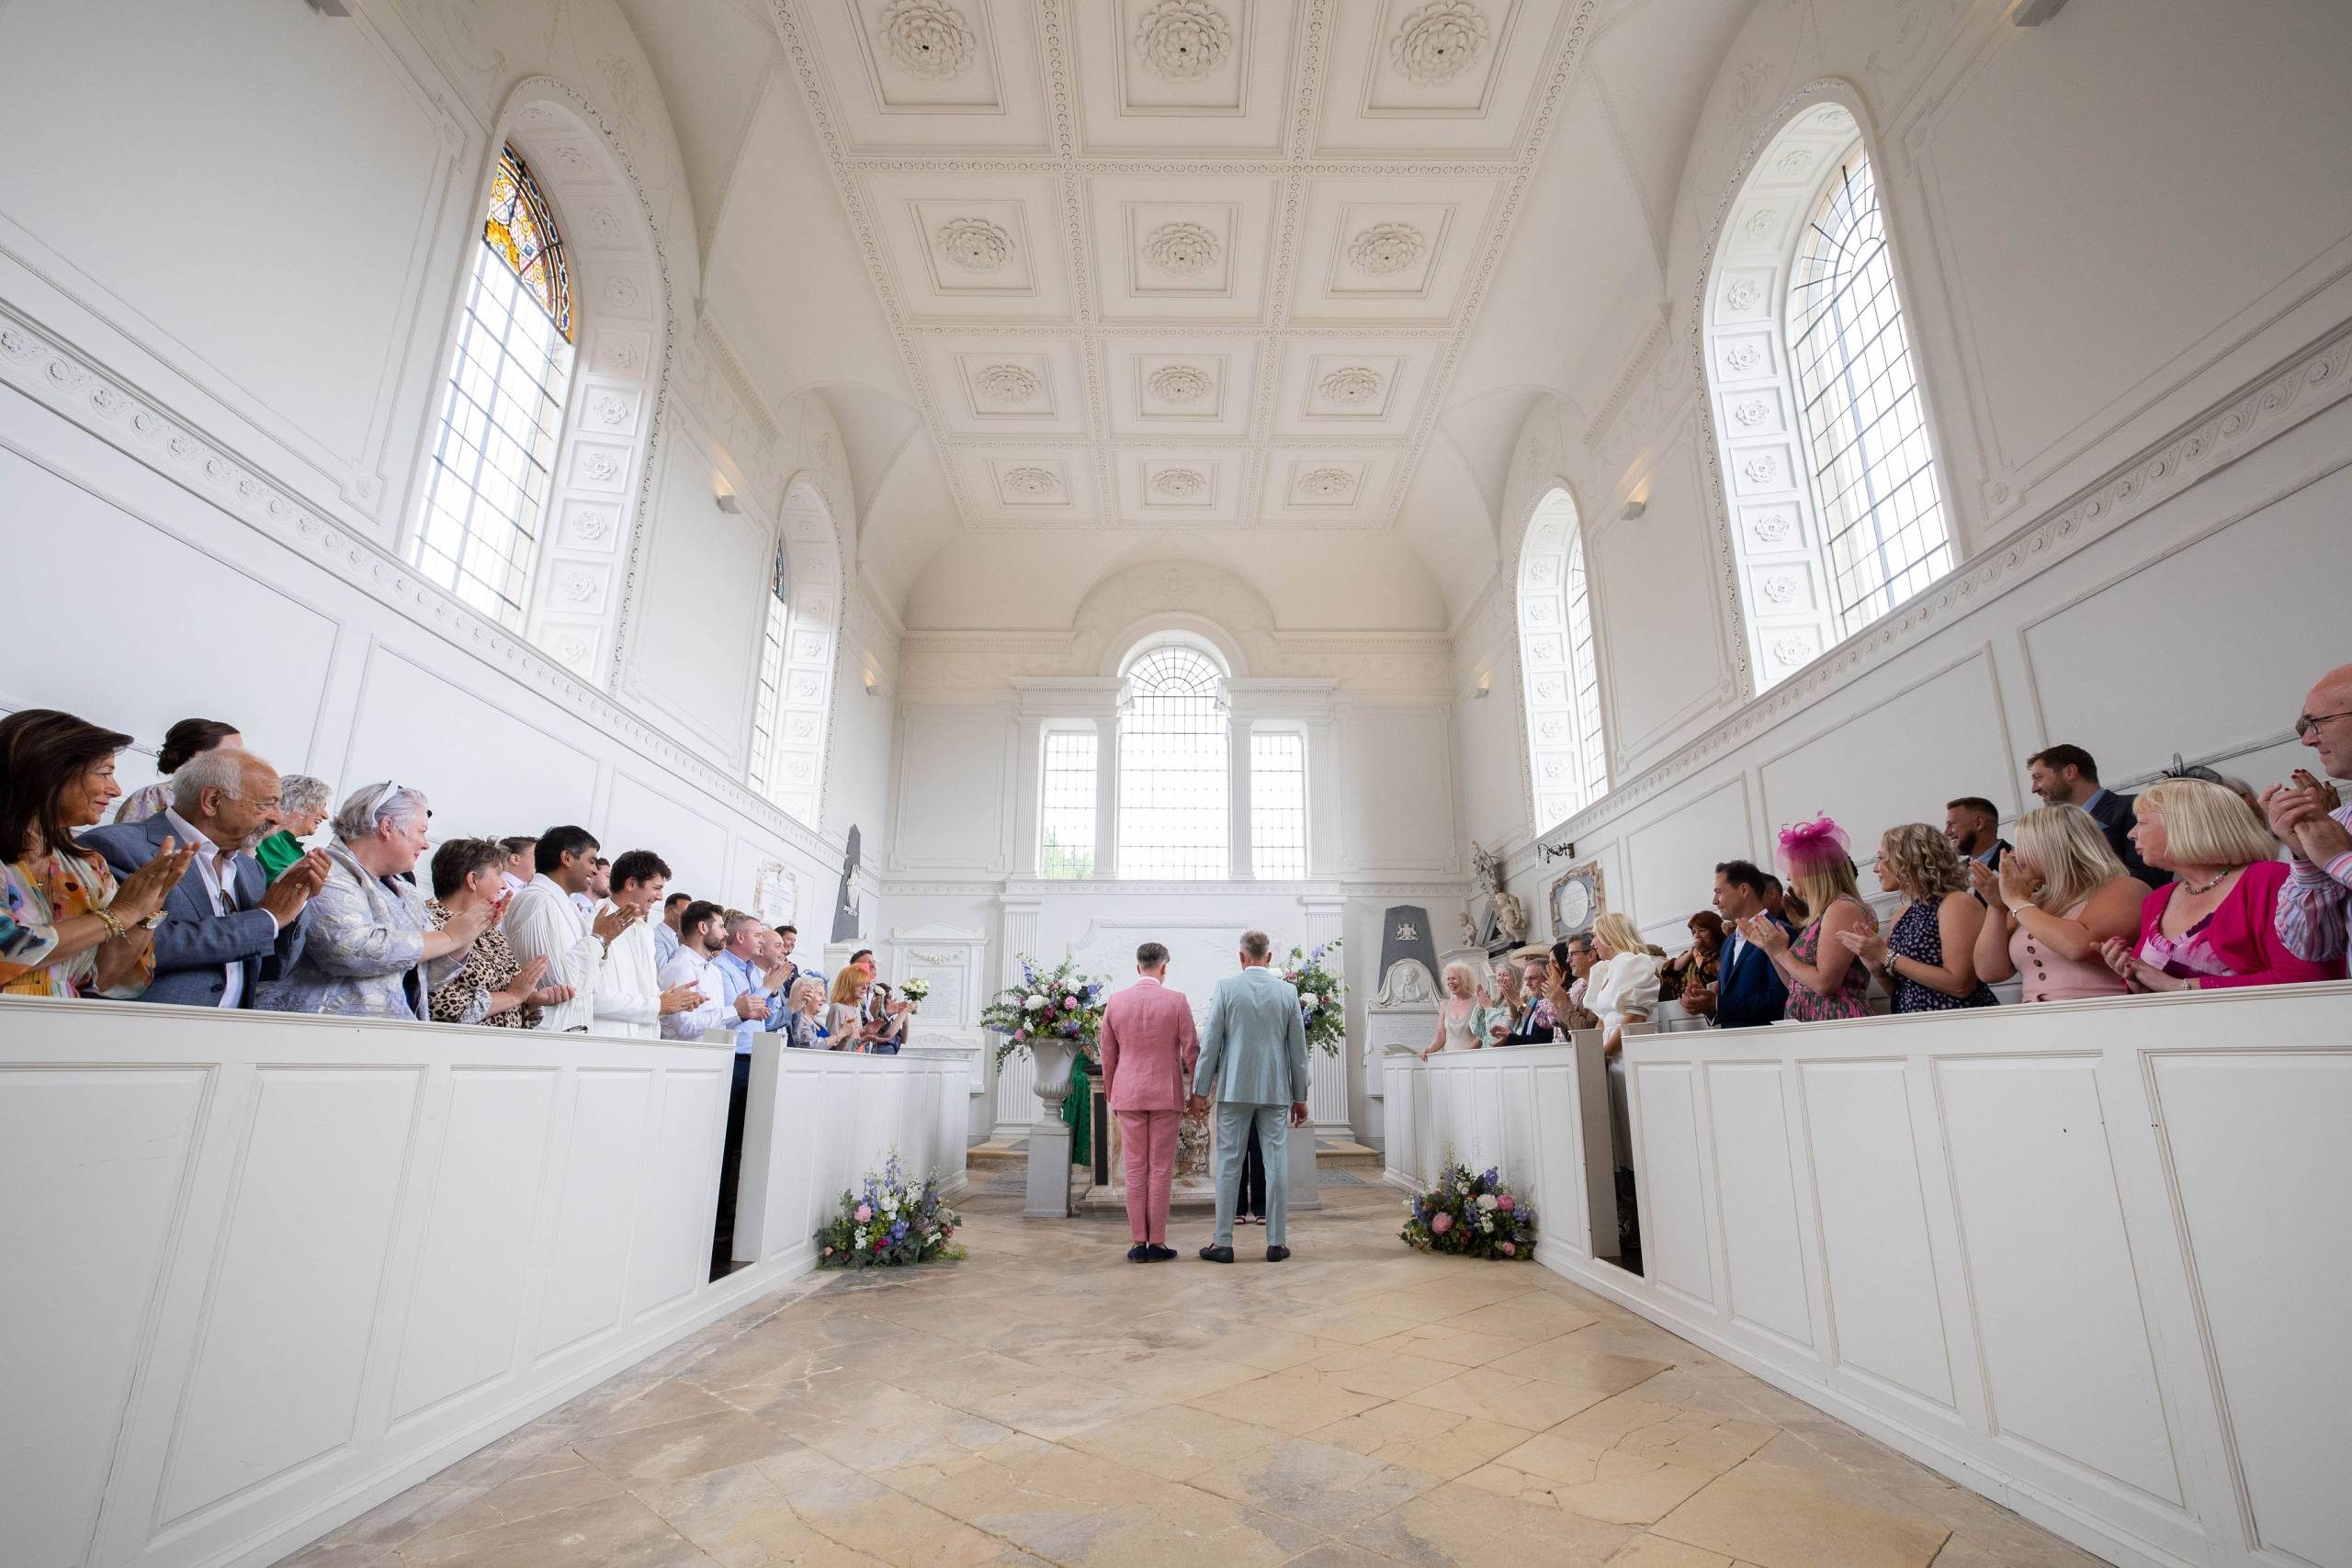 A groom in a blue suit and a groom in a pink suit stand at an altar in a white neo-classical chapel